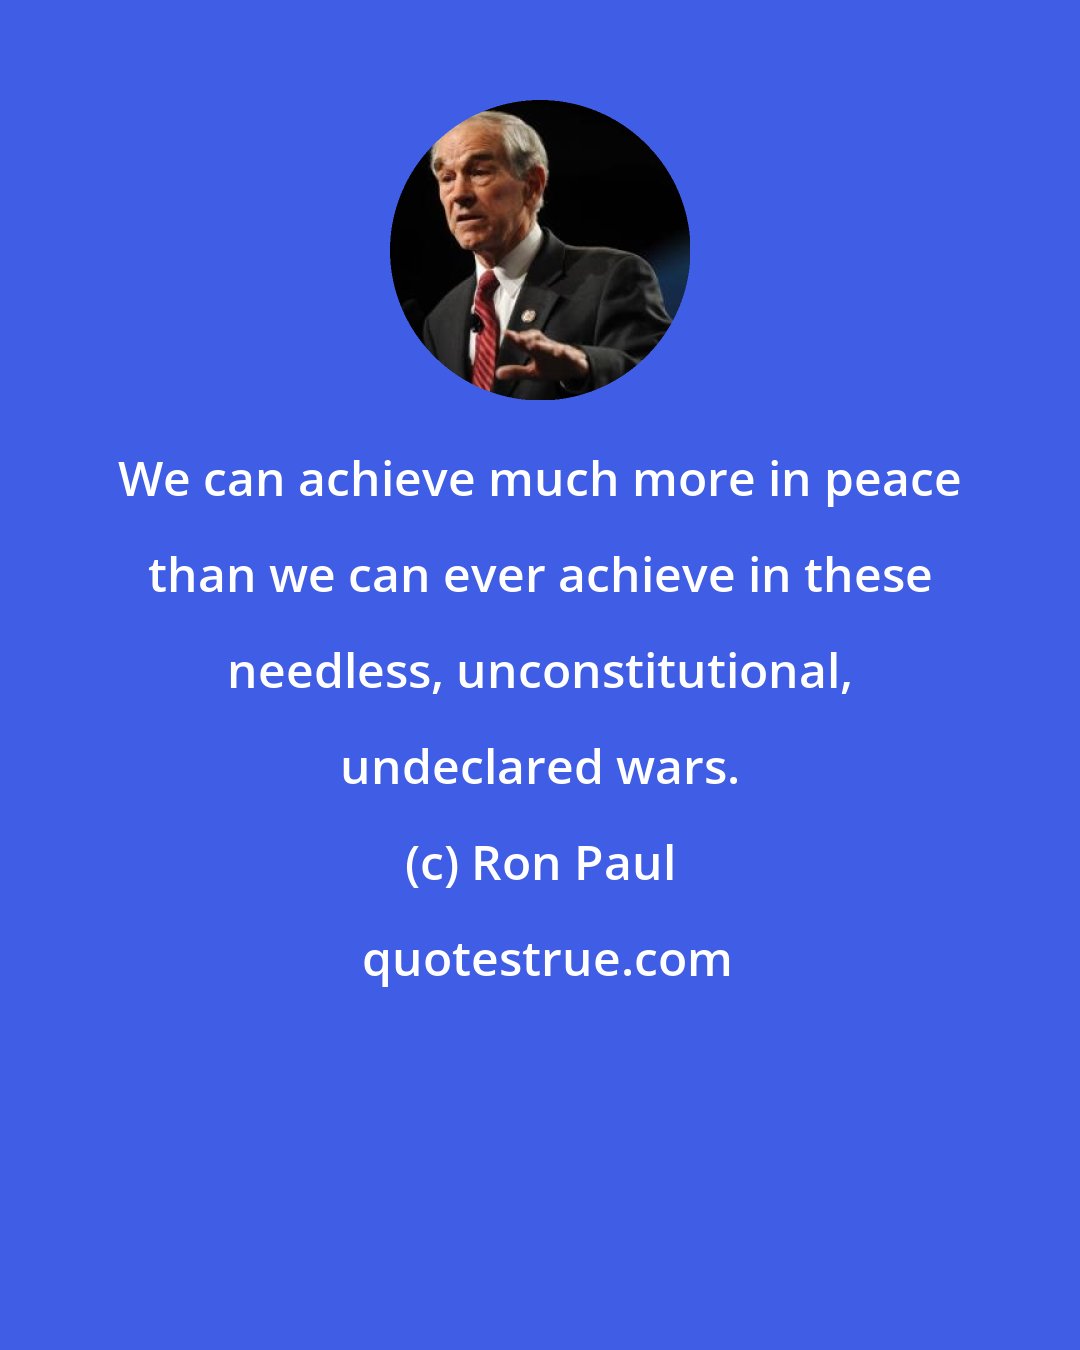 Ron Paul: We can achieve much more in peace than we can ever achieve in these needless, unconstitutional, undeclared wars.